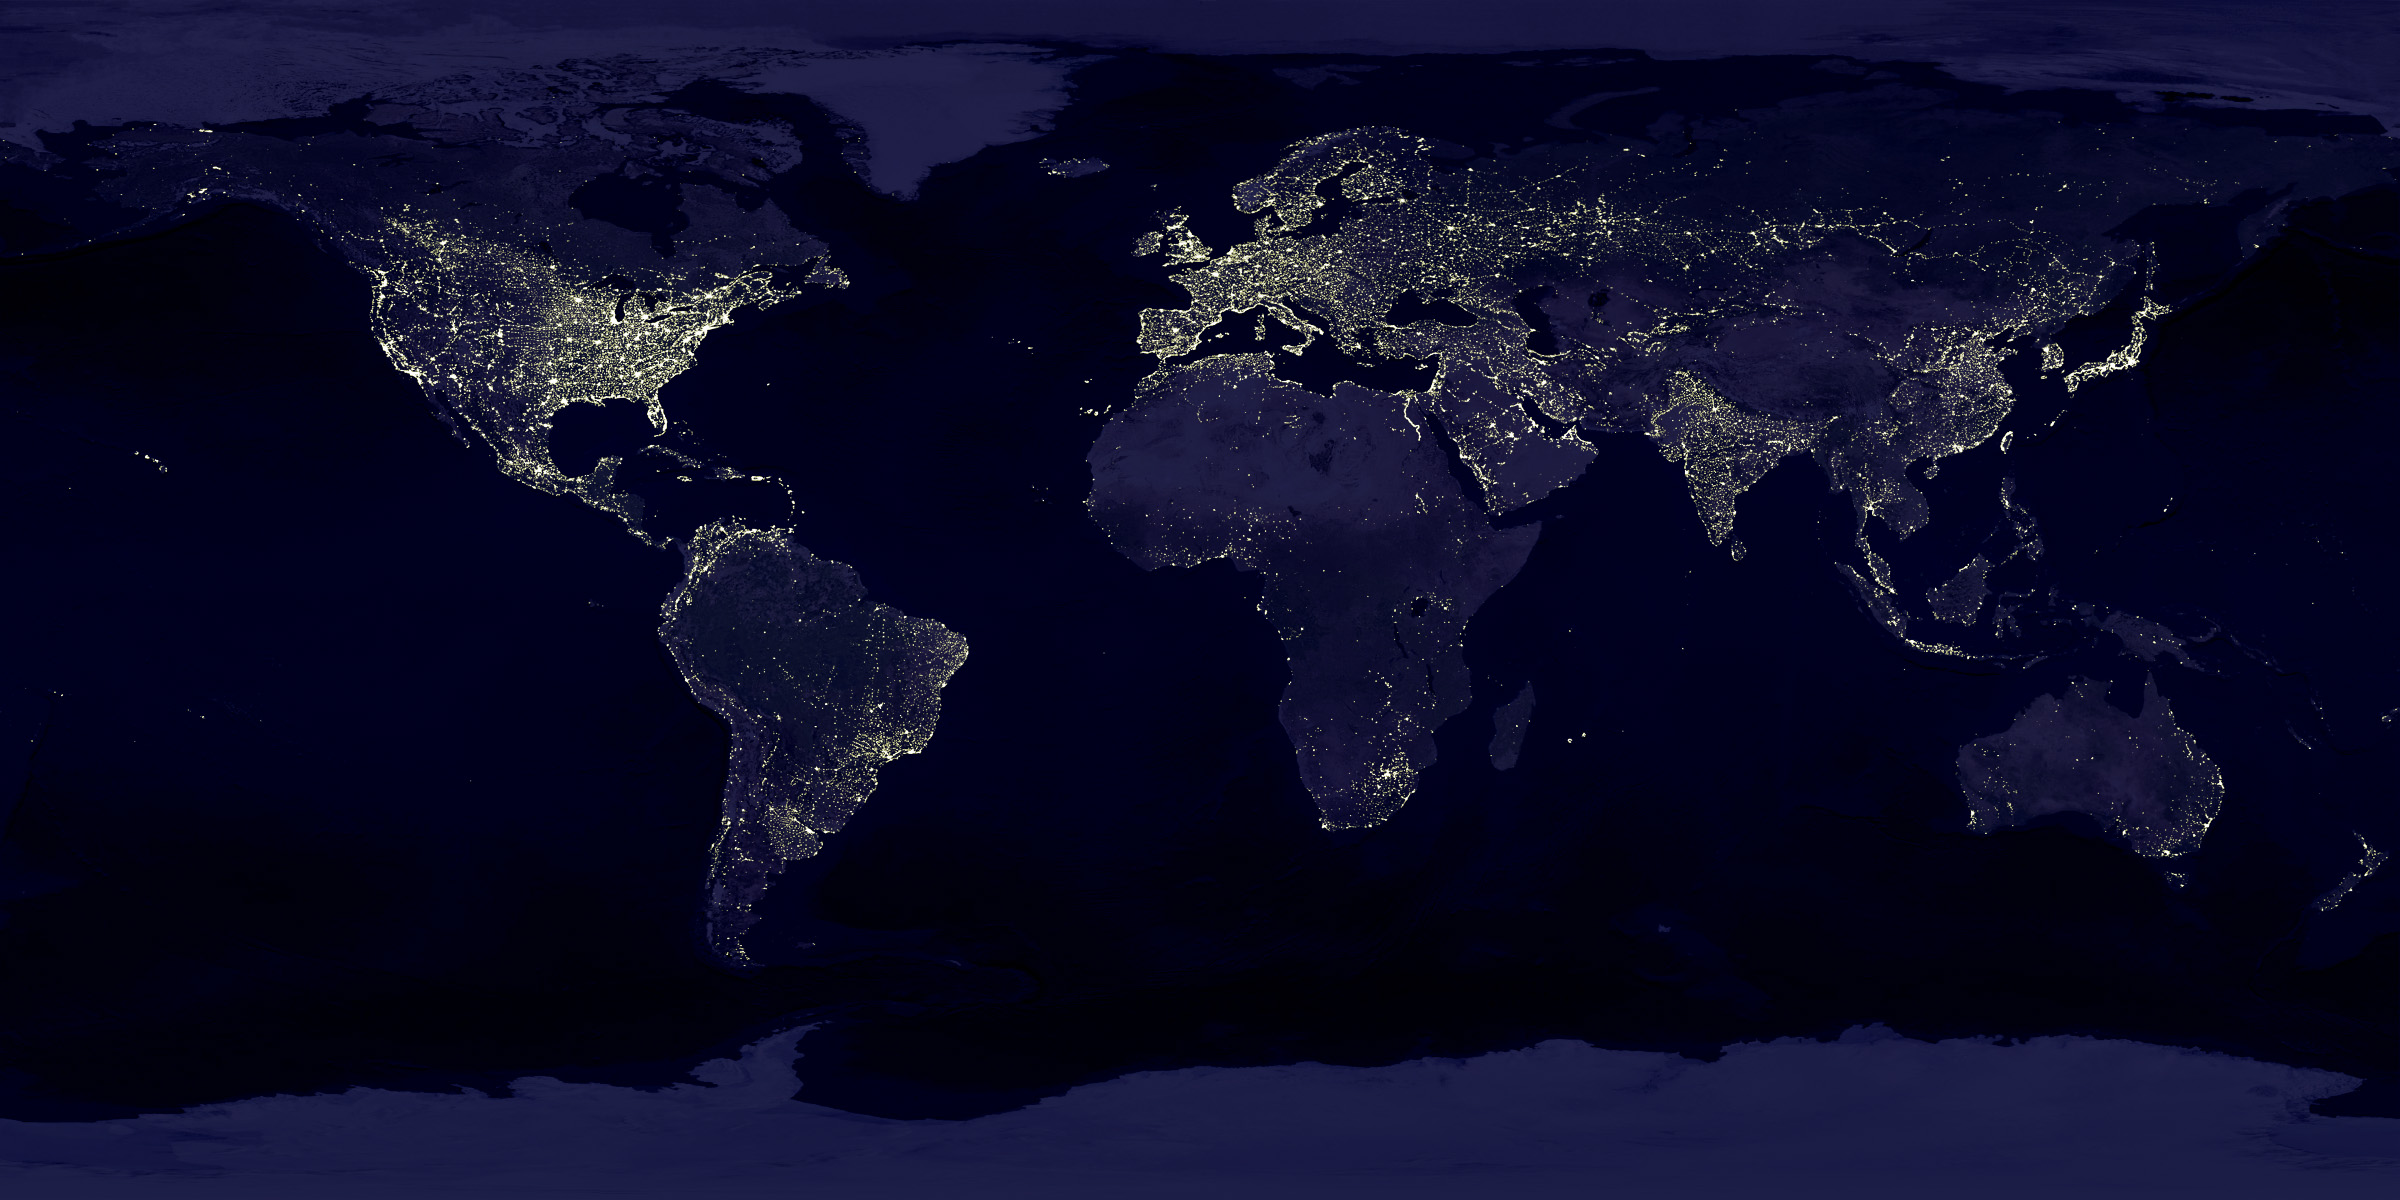 Planisphère nocturne - Data courtesy Marc Imhoff of NASA GSFC and Christopher Elvidge of NOAA NGDC. Image by Craig Mayhew and Robert Simmon, NASA GSFC